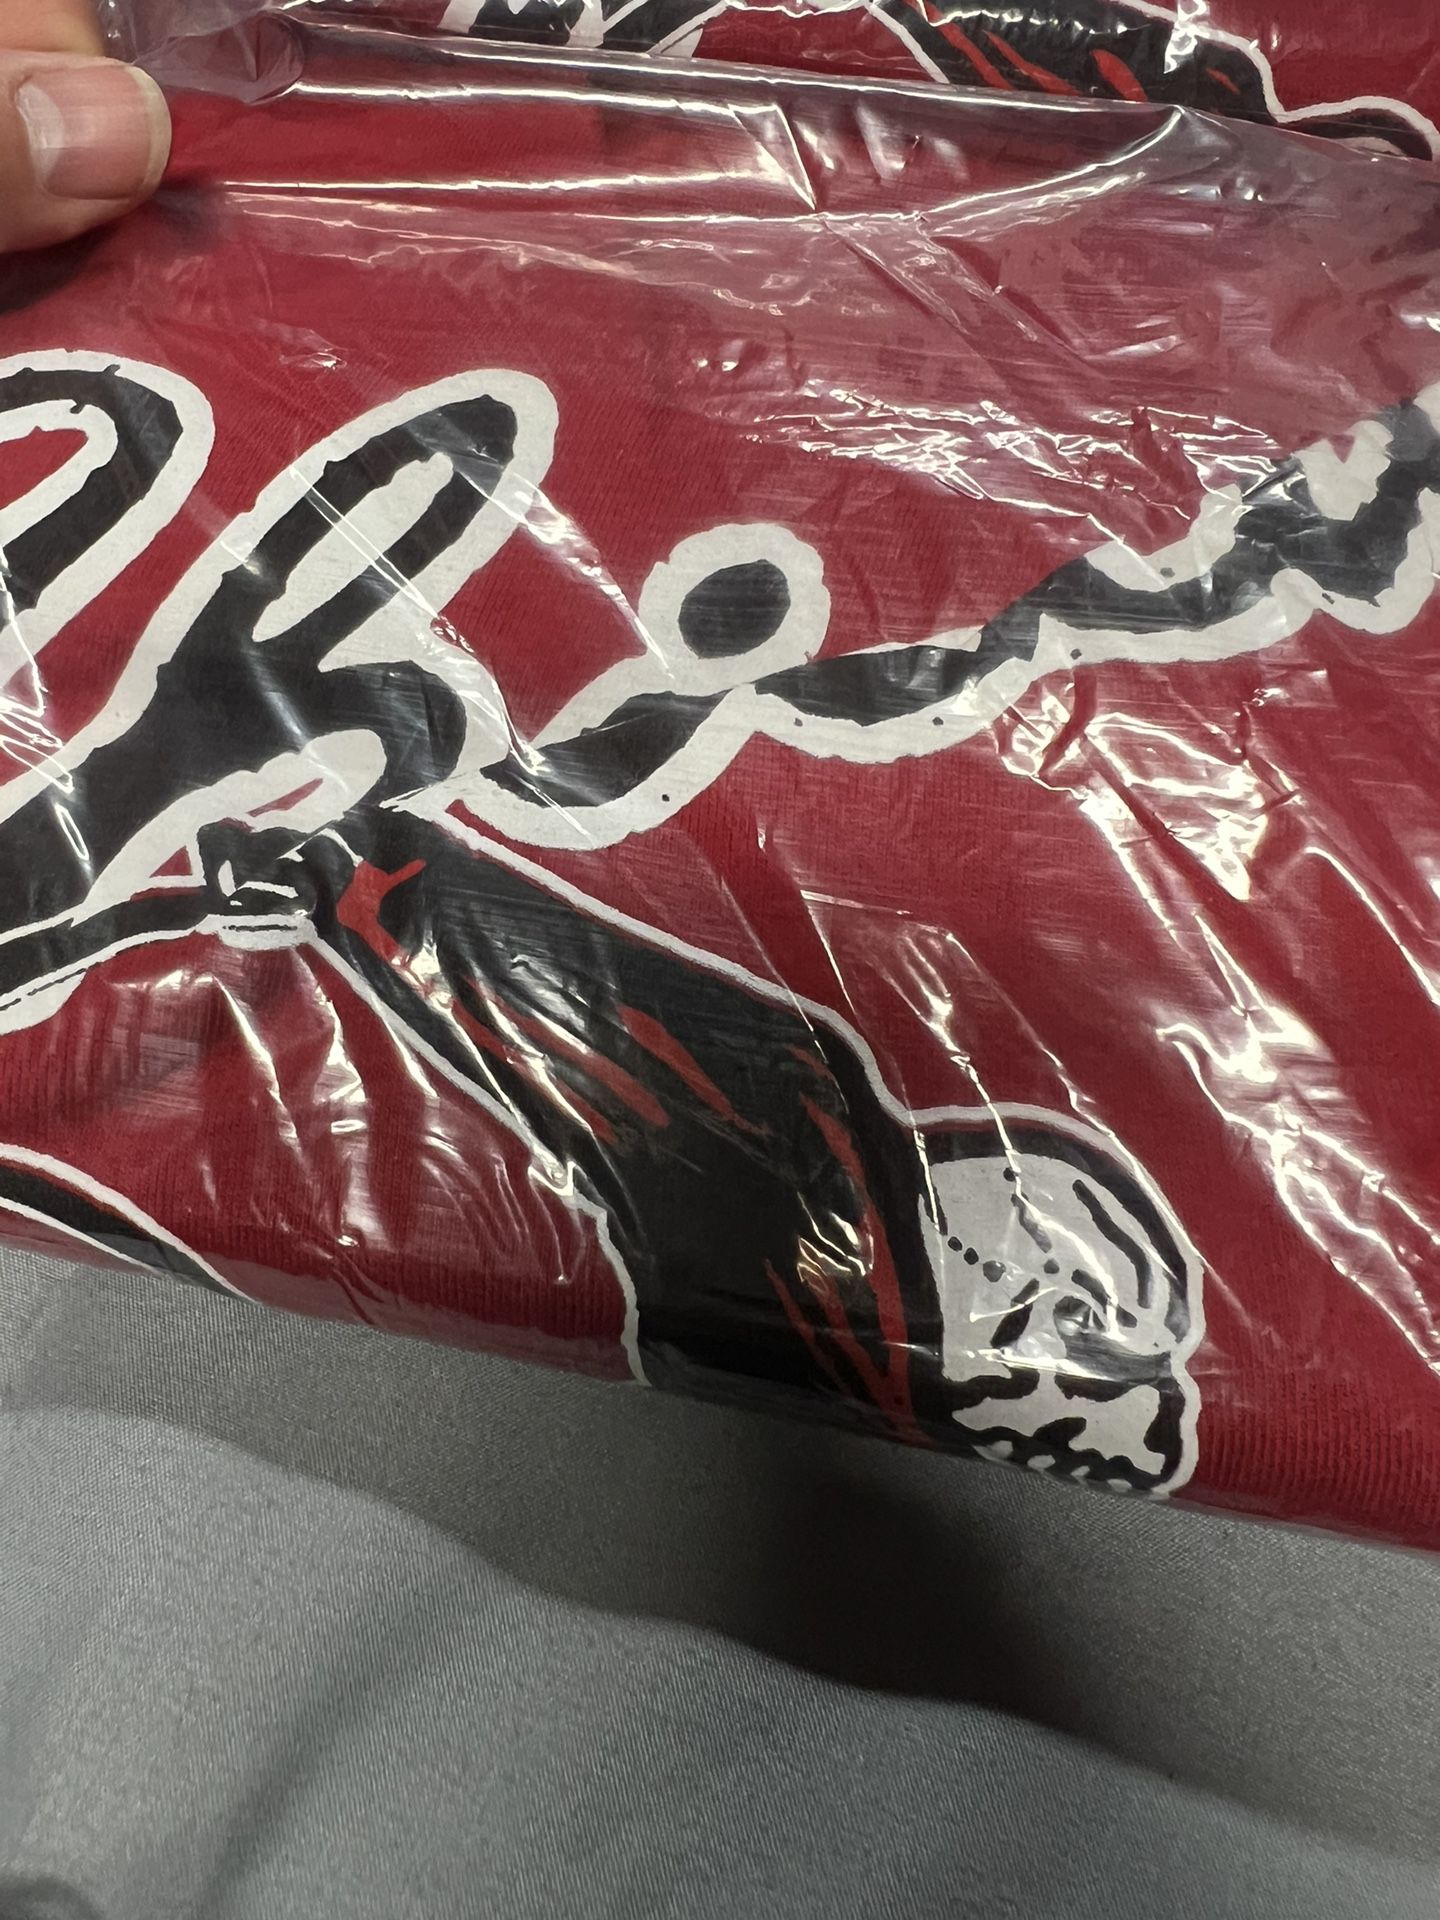 Juice WRLD Chicago Bulls Mitchell & Ness T-shirt for Sale in